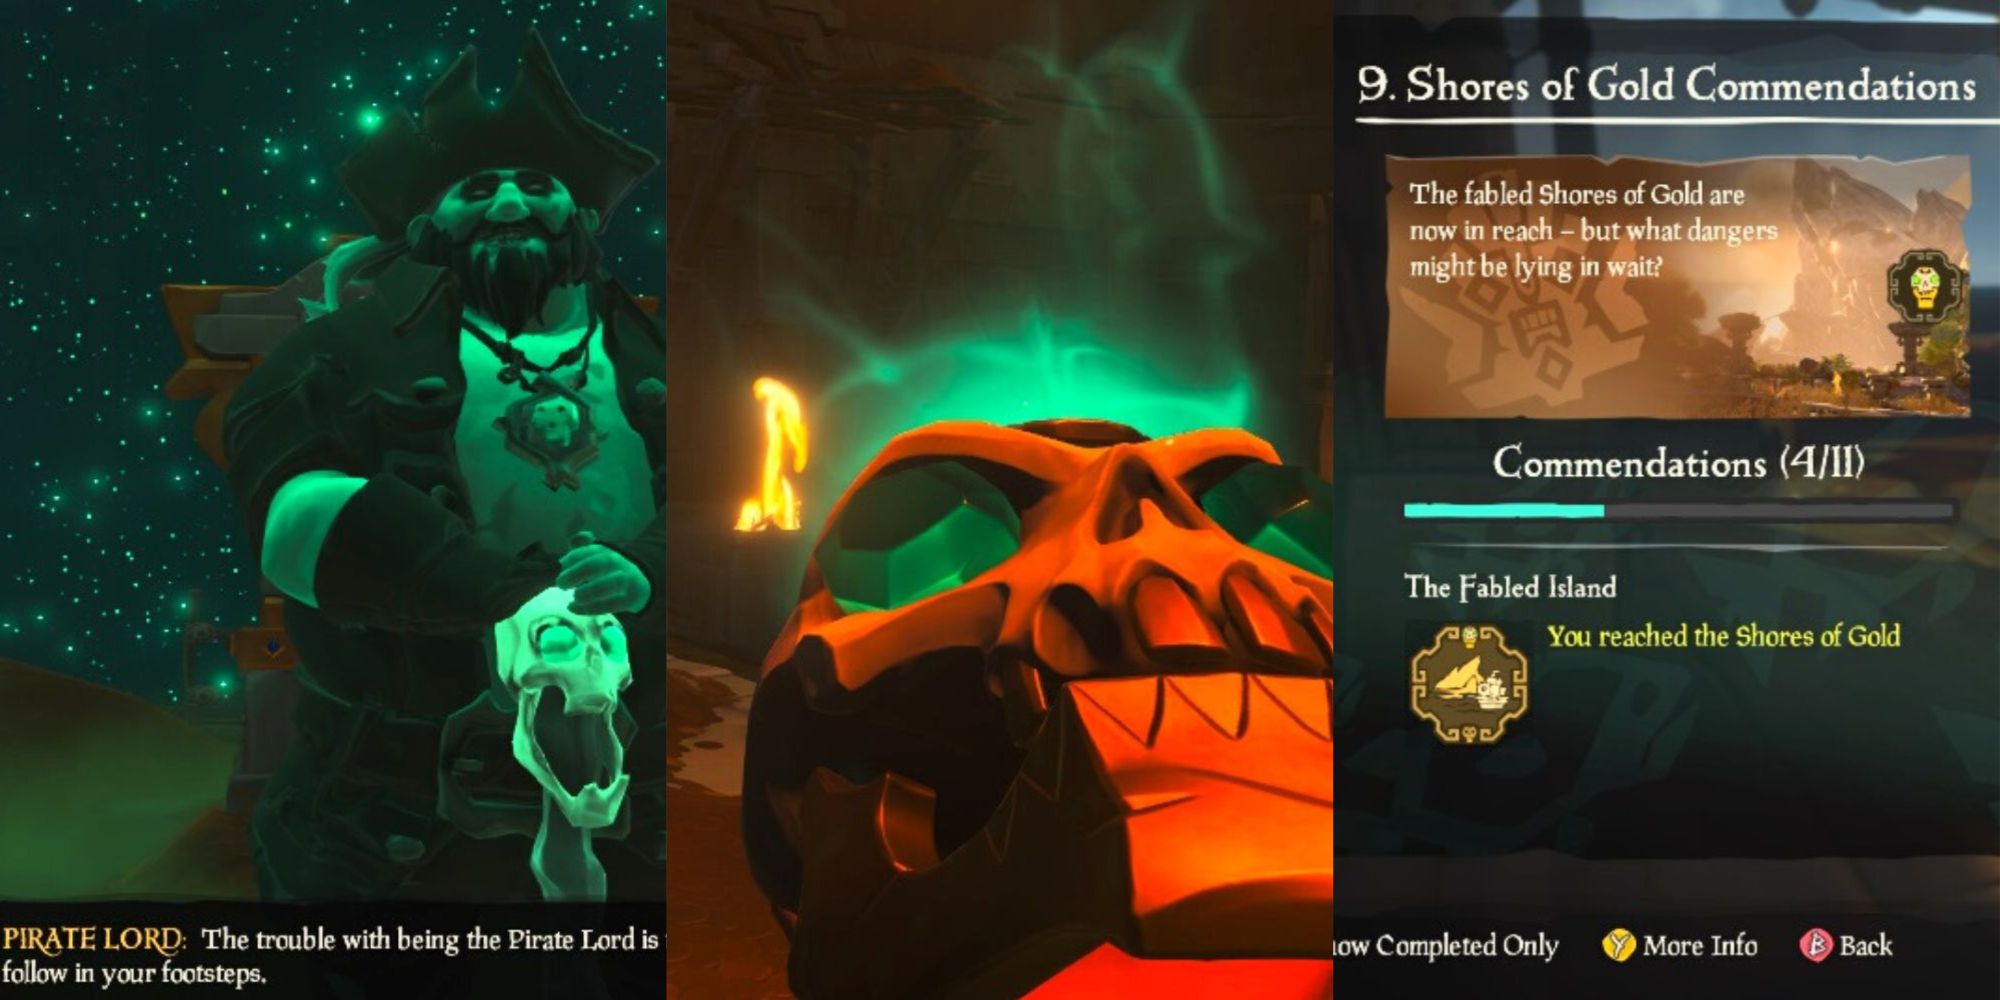 The Pirate Lord, The Gold Hoarder's Skull, And Commendations In The Shores Of Gold Tall Tale In Sea Of Thieves